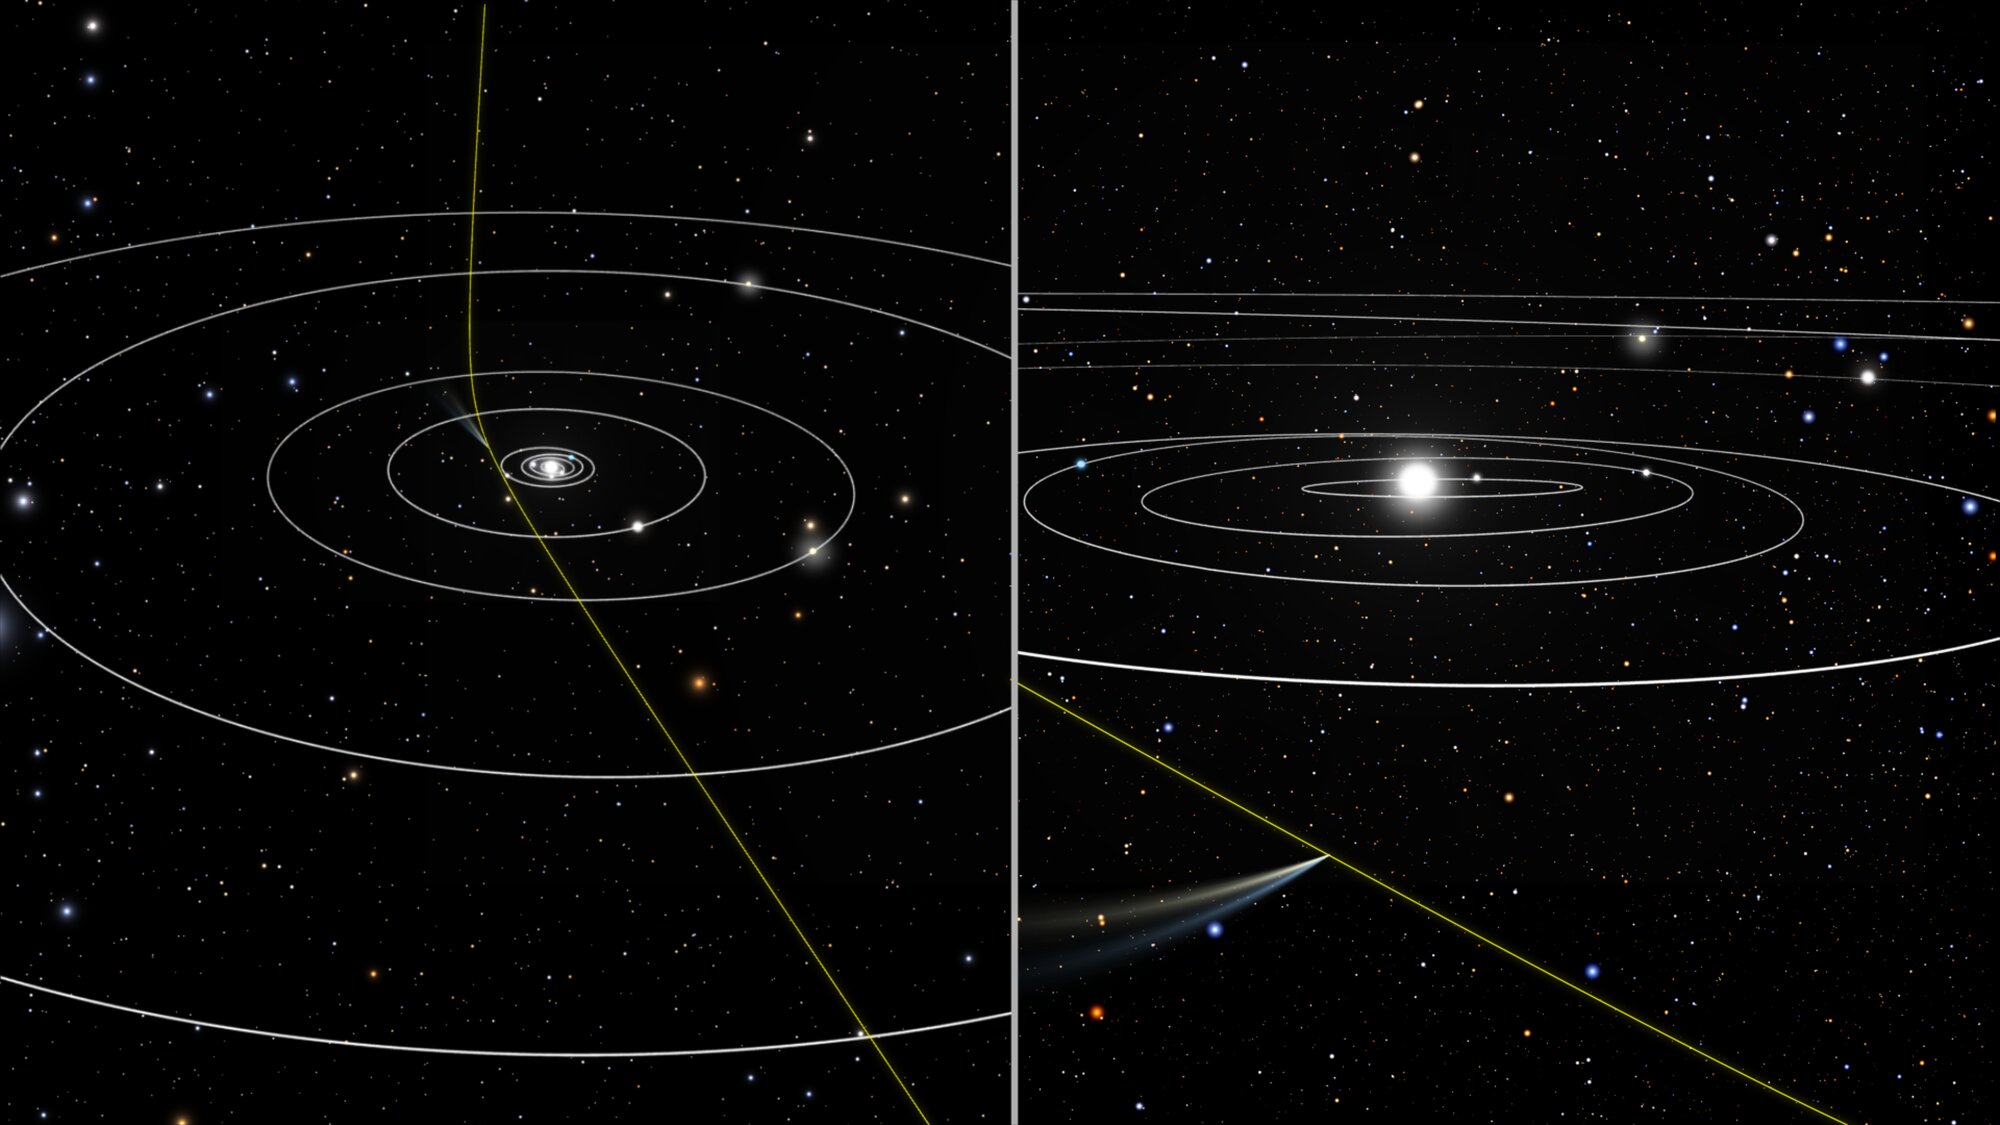 This illustration shows the path of comet 2I/Borisov through our solar system. This visitor came from interstellar space along a hyperbolic trajectory. It is only the second known intruder to zoom through our solar system. (The interstellar object 'Oumuamua was detected in 2017.) As the graphic shows, the comet's straight path across interstellar space is slightly deflected by the gravitational pull of our Sun. The comet is traveling so fast, at 110,000 miles per hour, it will eventually leave the solar system. The panel on the right shows the comet's position relative to Earth when the Hubble Space Telescope observed it on October 12, 2019, when the comet was 260 million miles from Earth. The background star field in the left panel is the constellation Eridanus. The background field in the right panel is the constellation Sagittarius. 